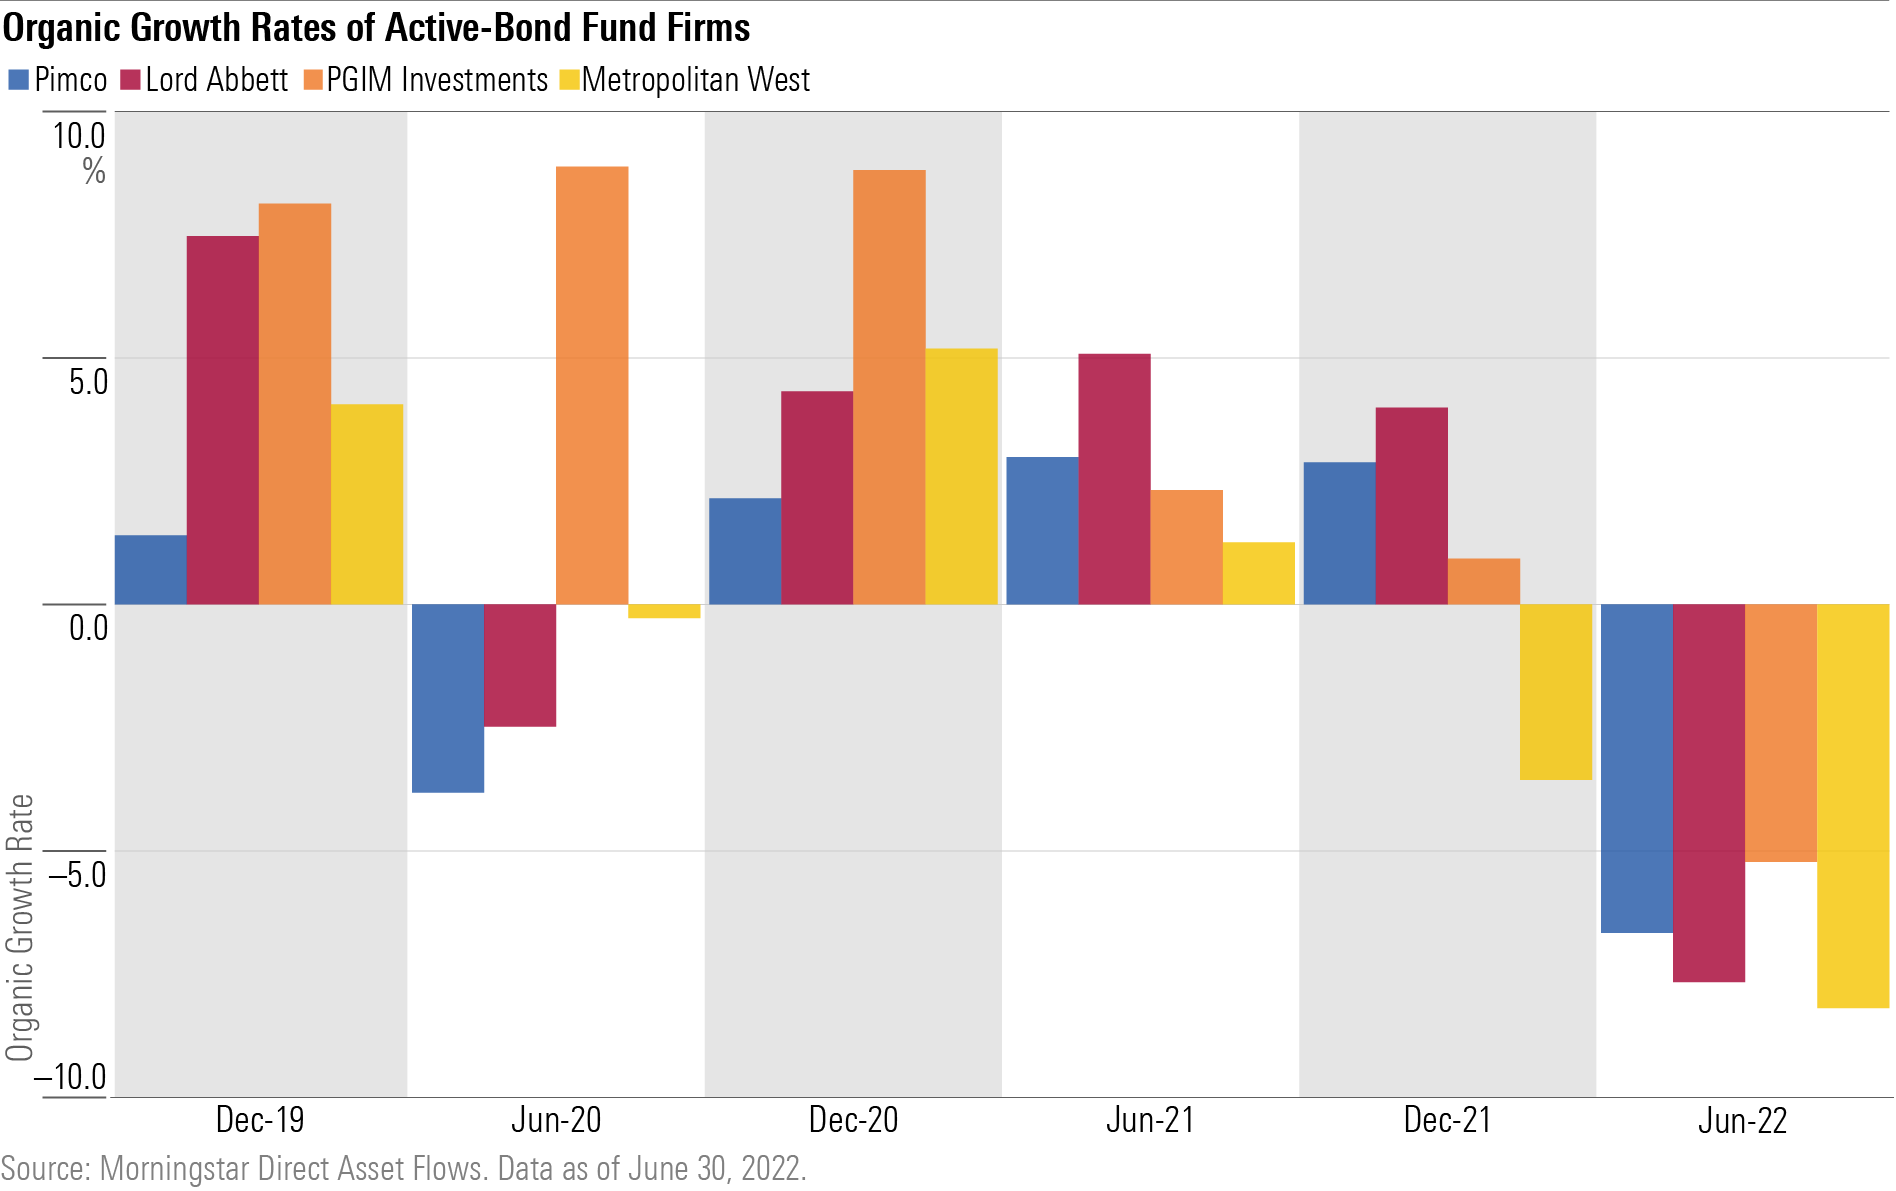 A bar chart showing that Pimco, Lord Abbett, PGIM Investments, and Metropolitan West had pronounced outflows in the first half of 2022.